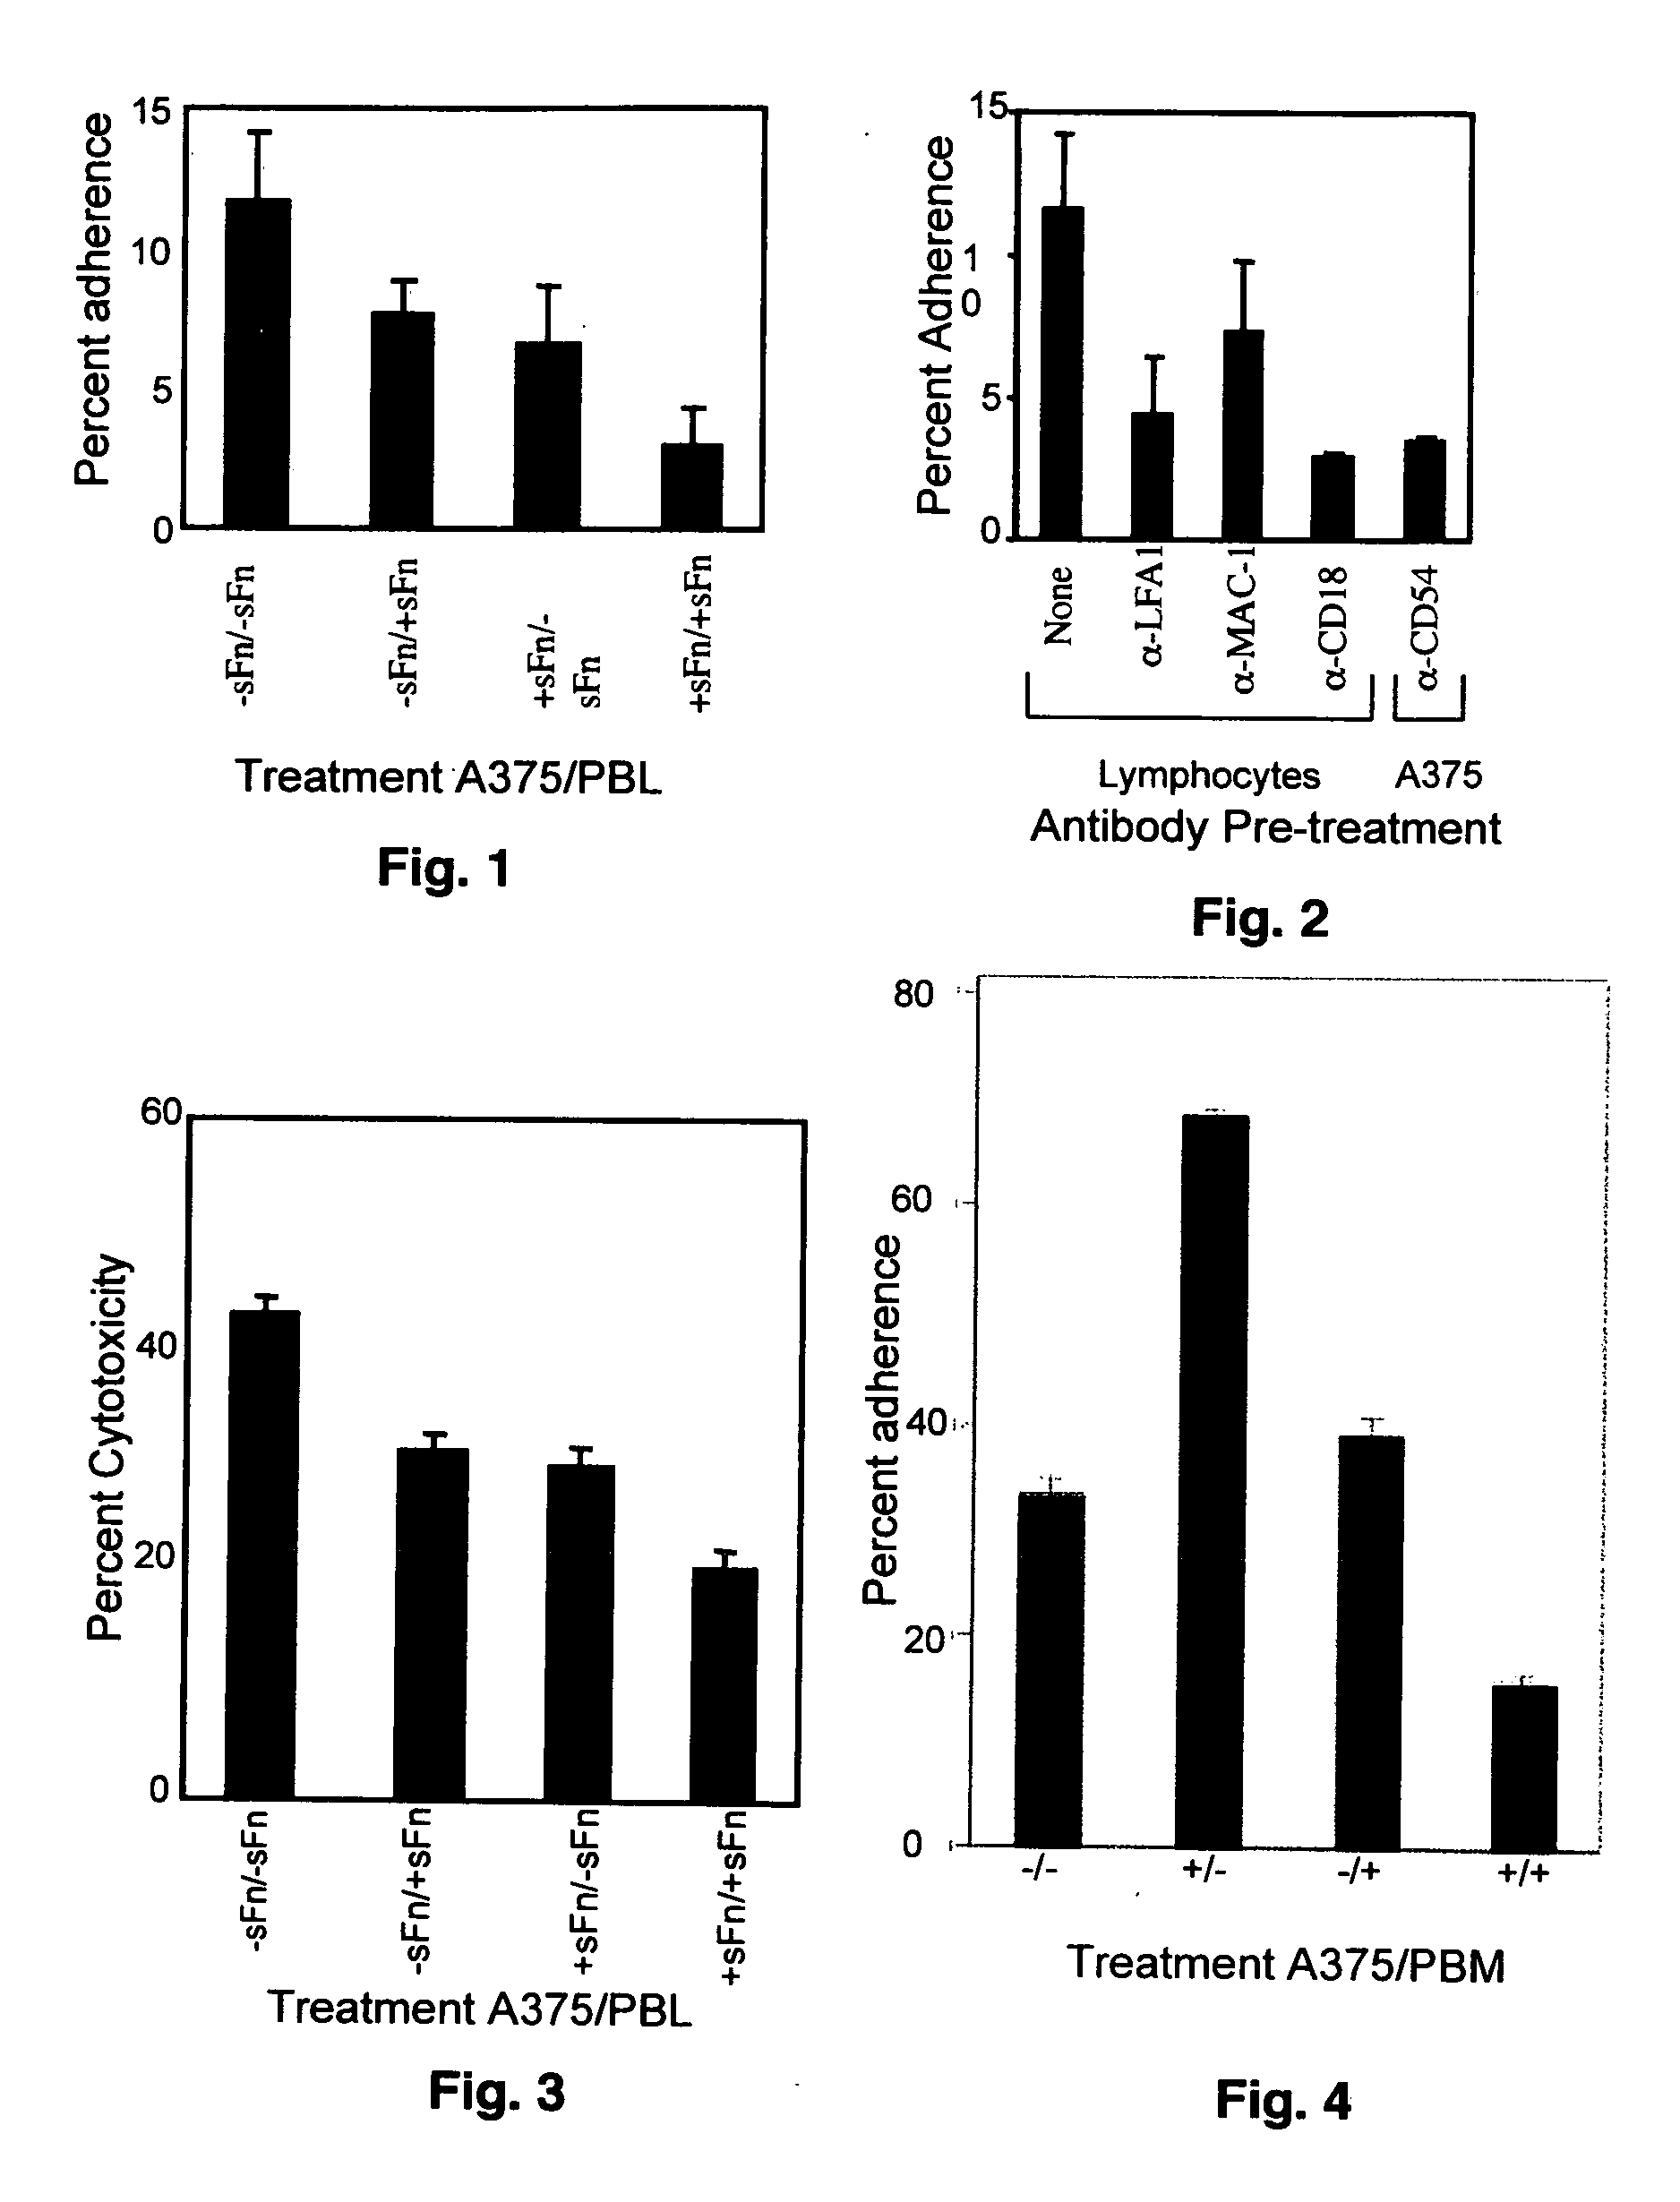 Soluble fibrin inhibitory peptides and uses thereof